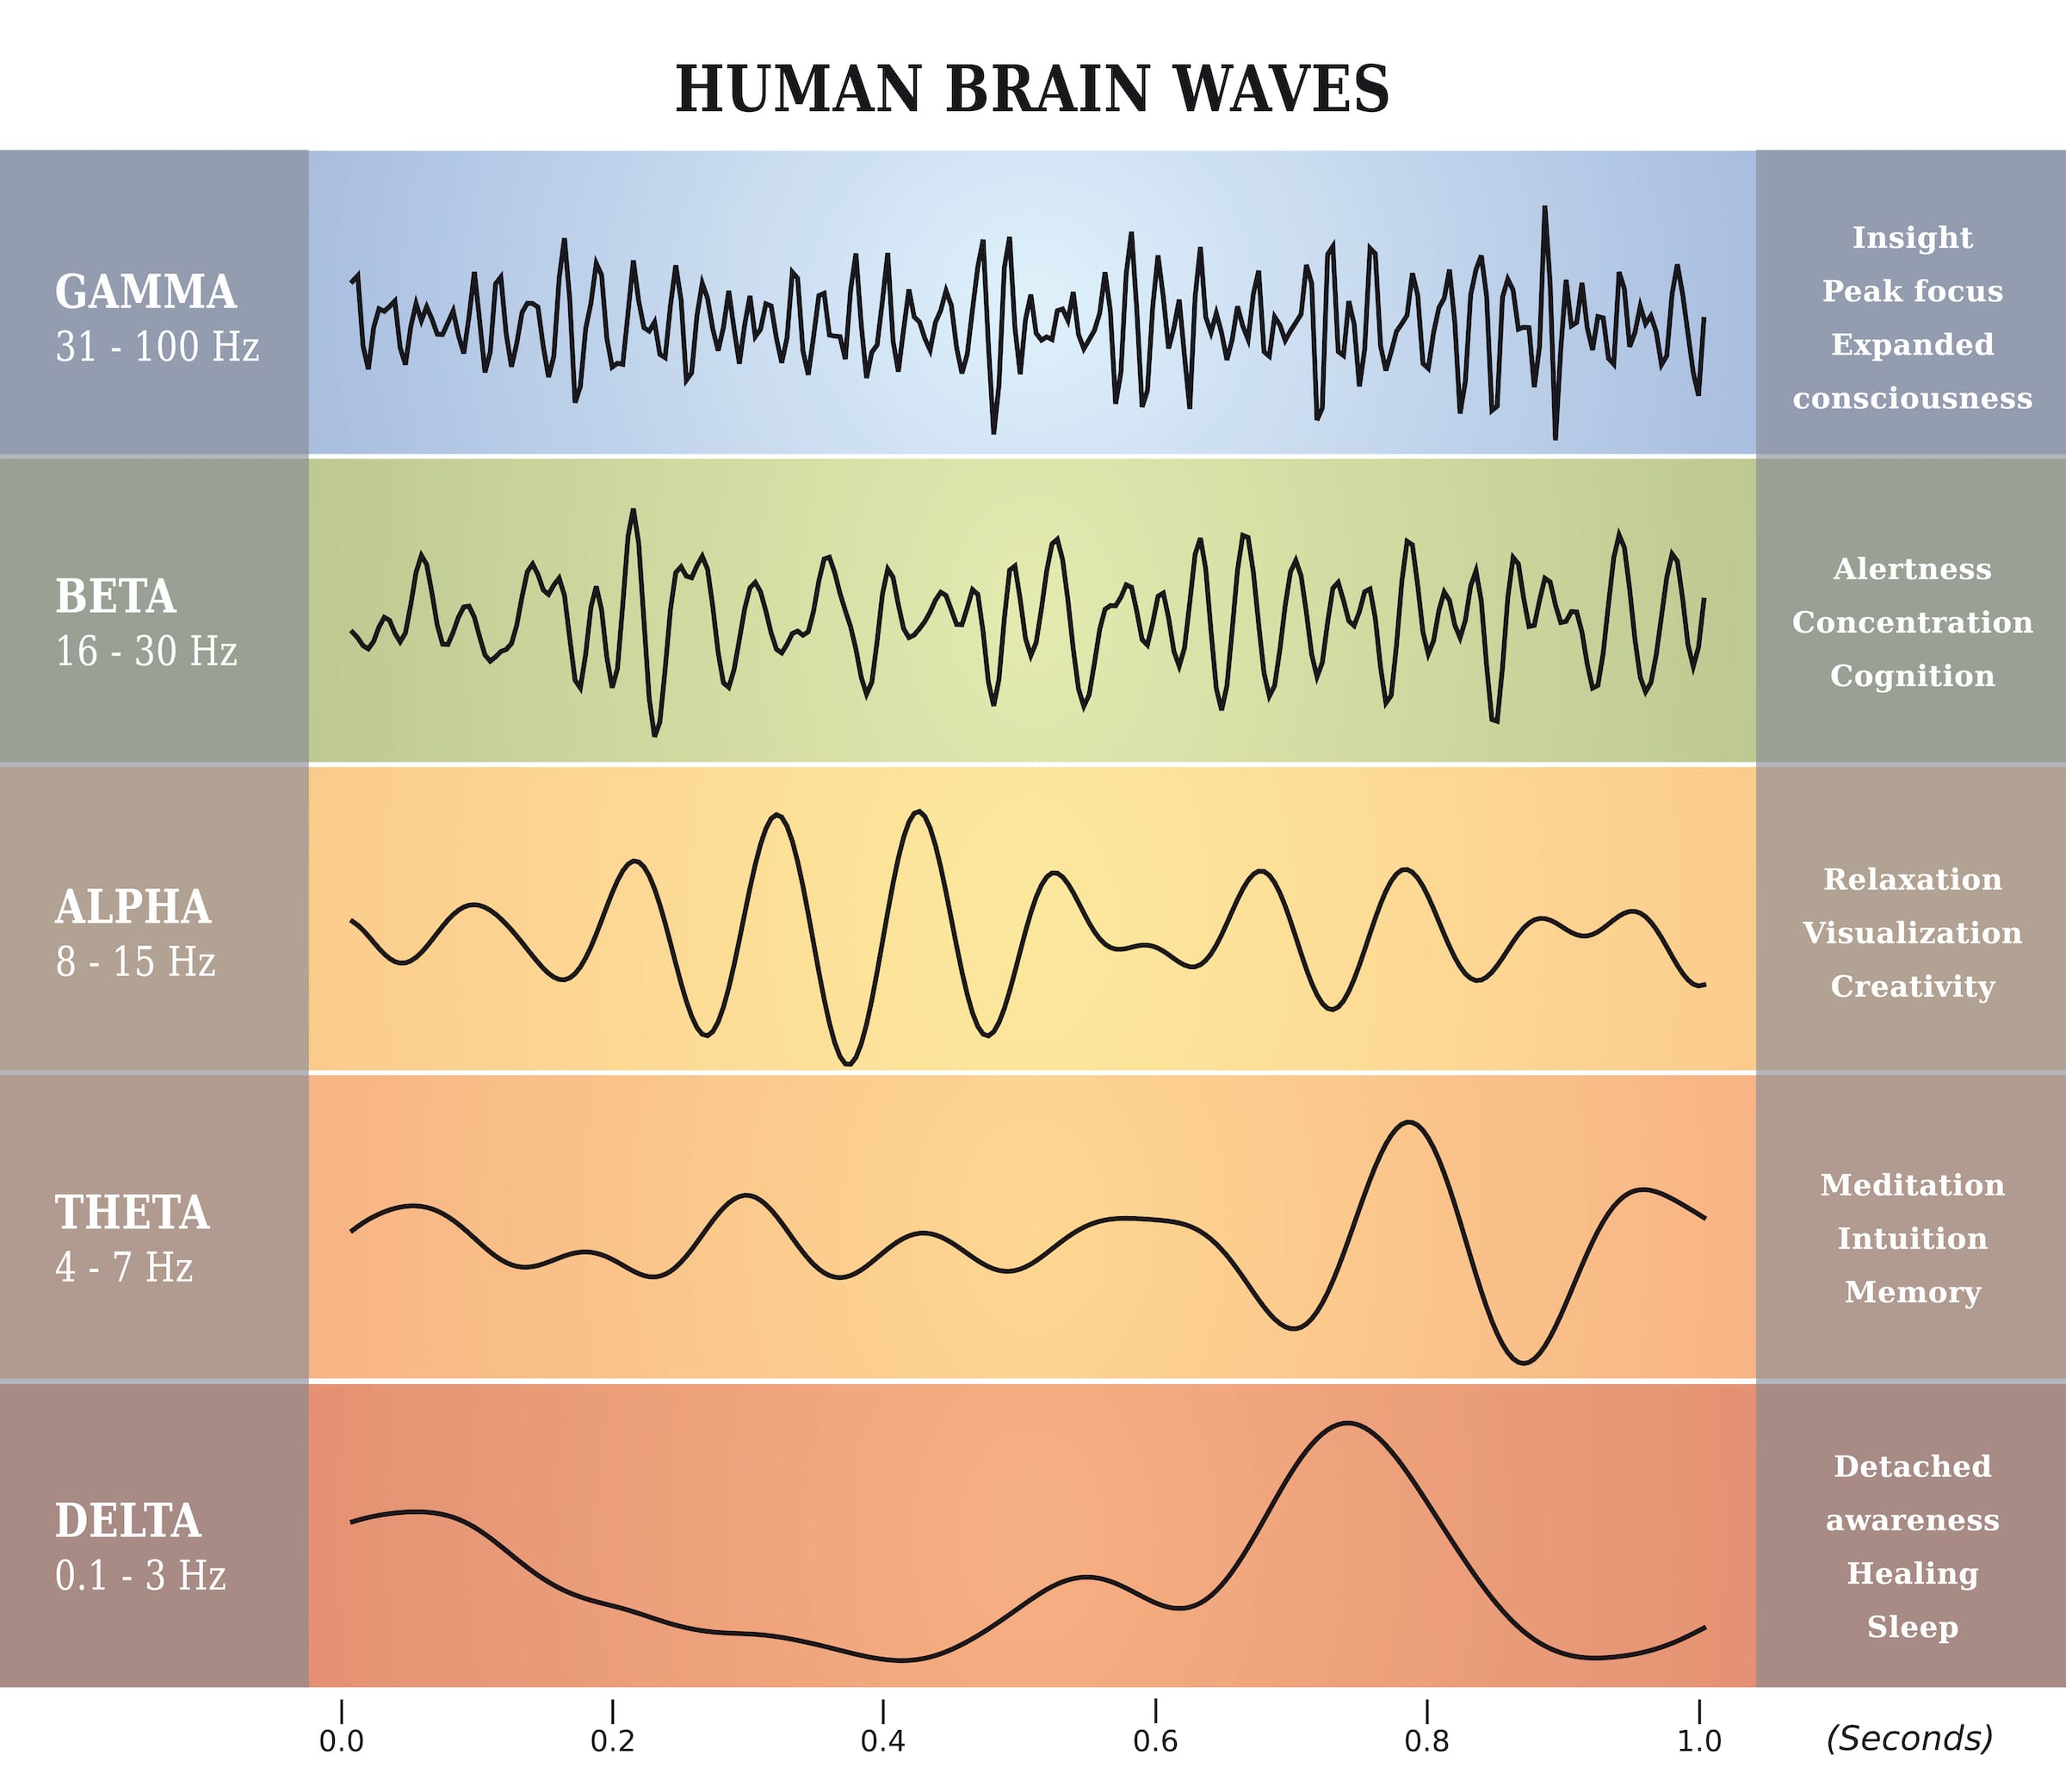 Brainwaves during different stages of sleep.